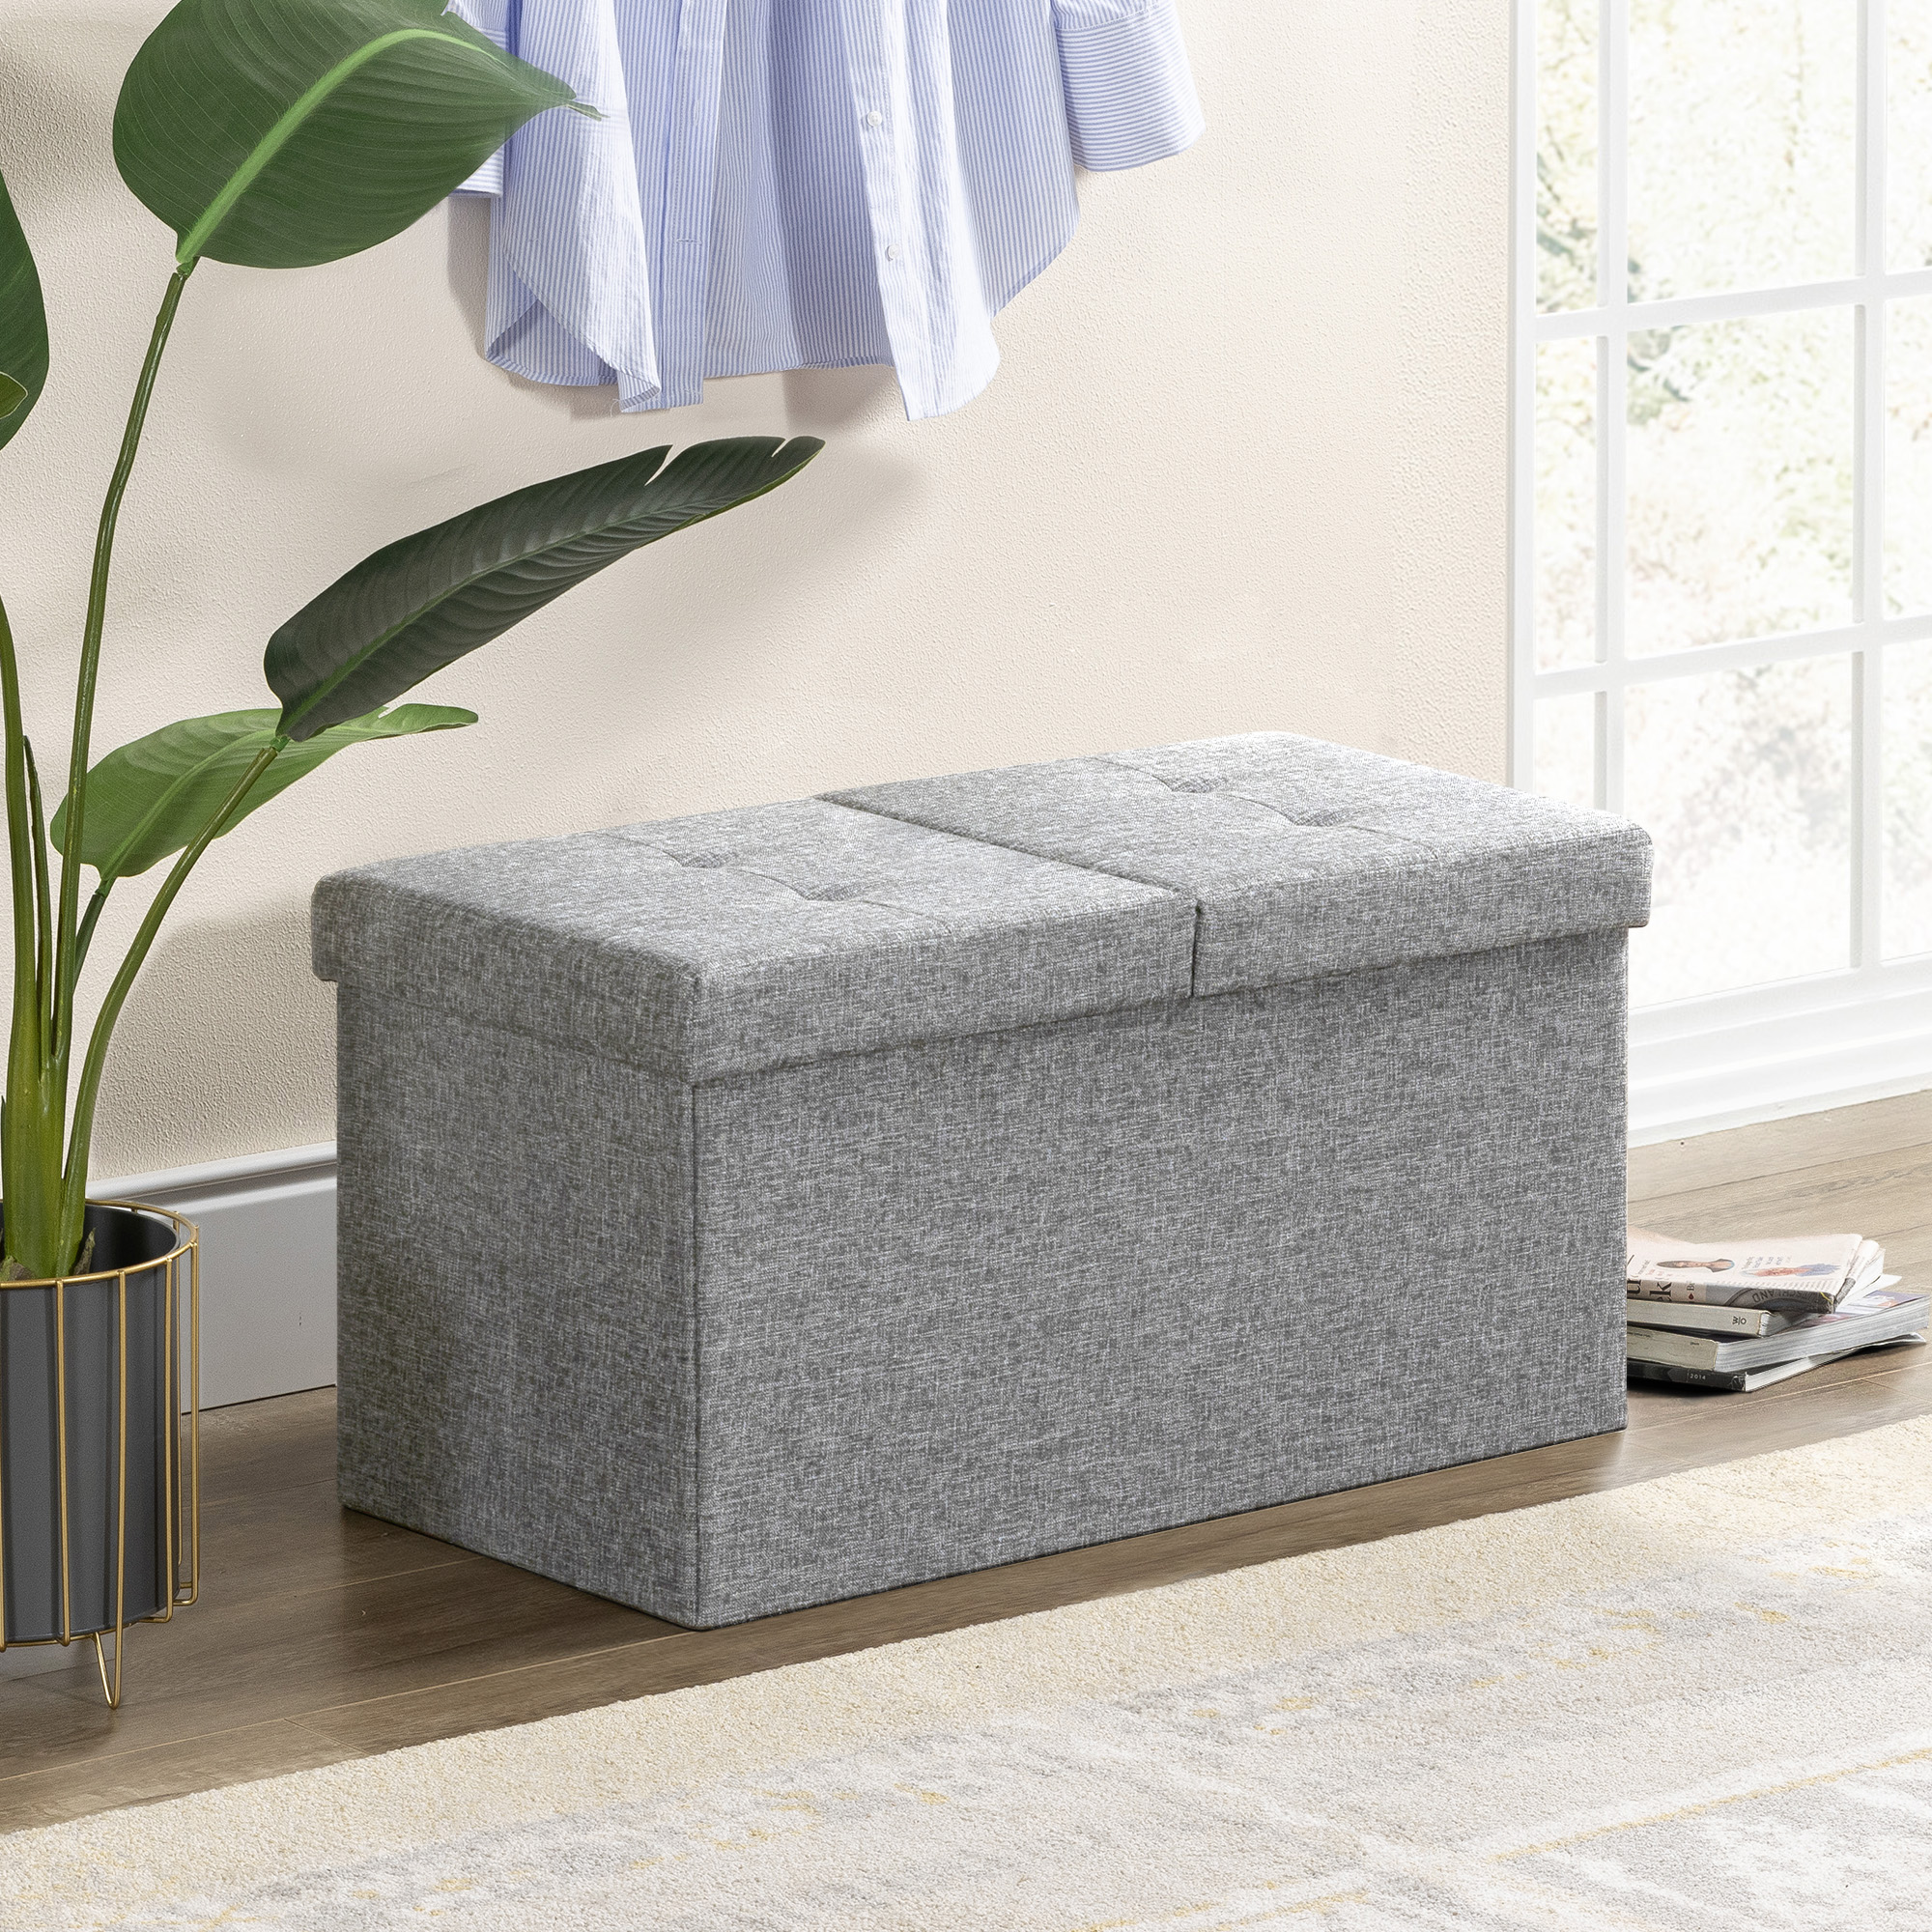 Mellow 30" Smart Lift Top Button Fabric Collapsible Storage Ottoman, Light Grey - image 2 of 9